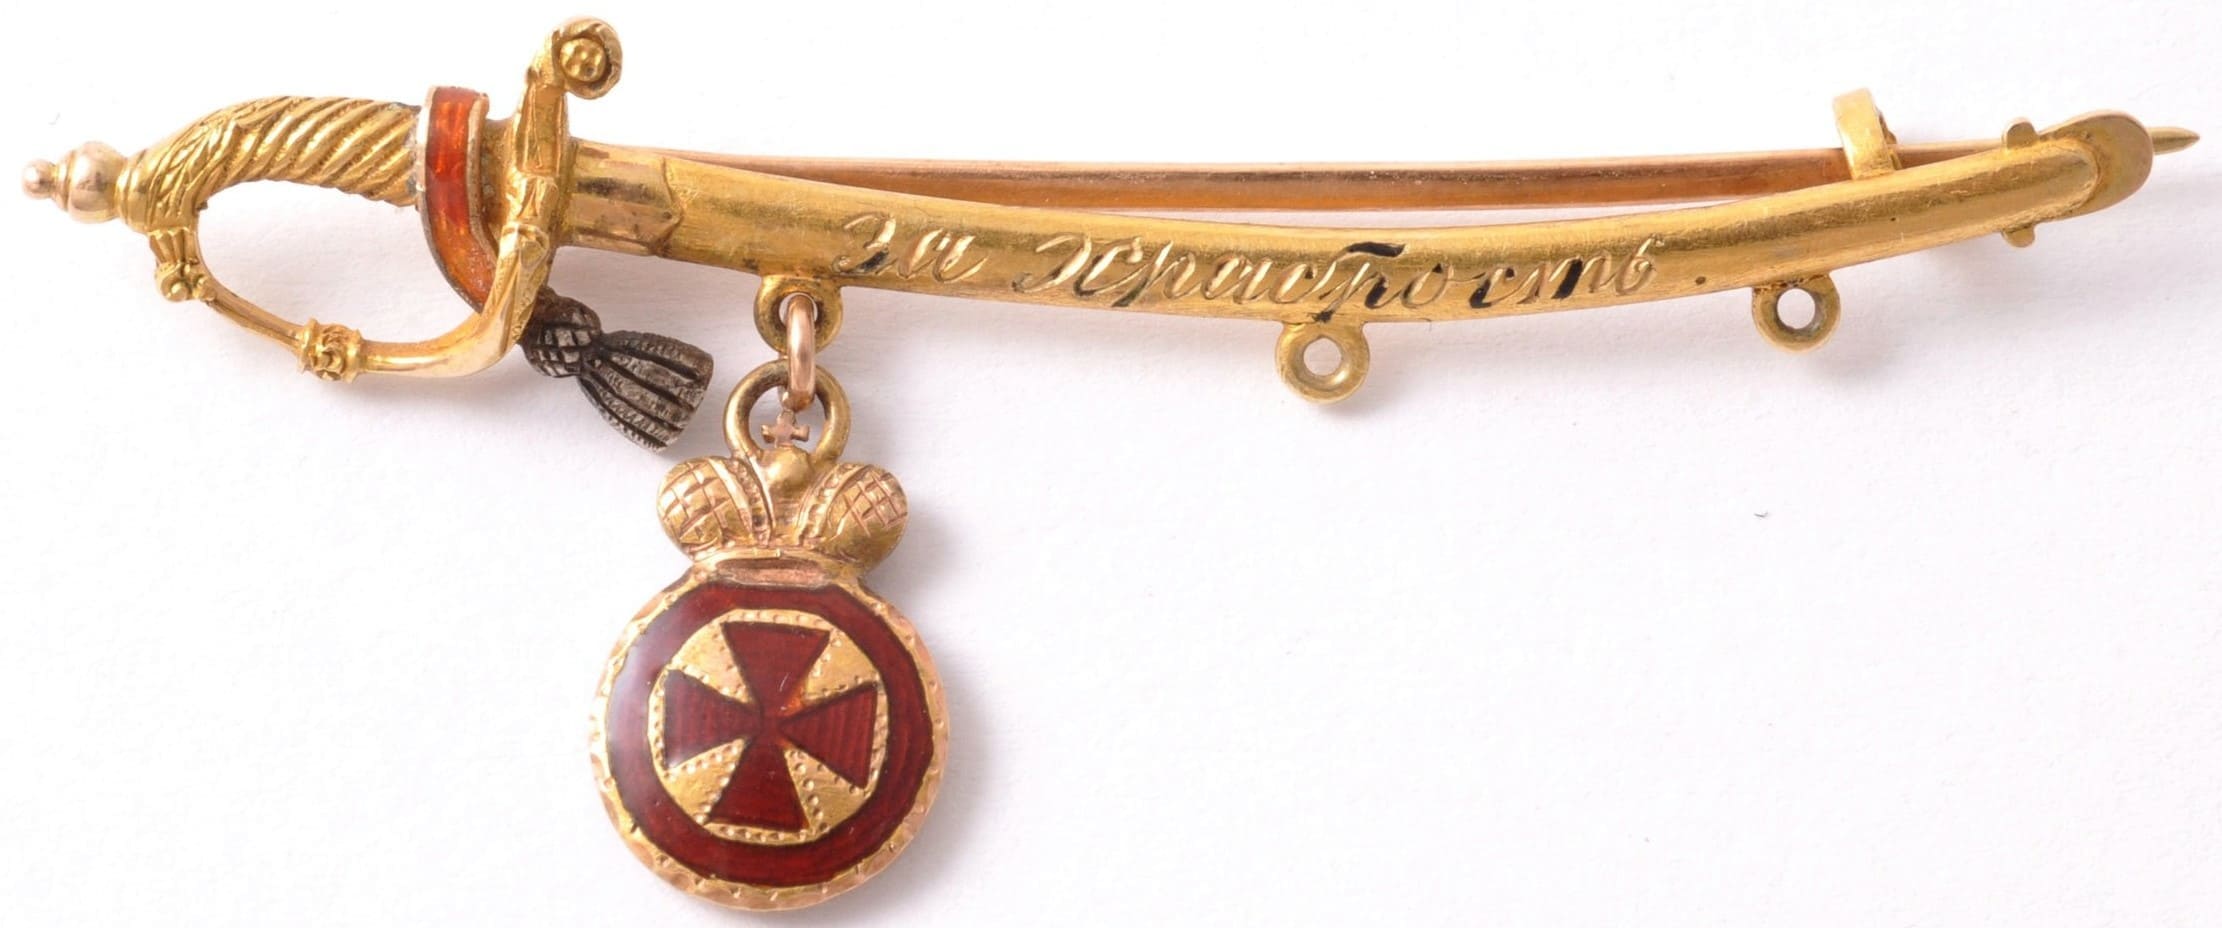 Miniature group with suspension in the form of an officer's sword with the inscription “For Bravery.jpg